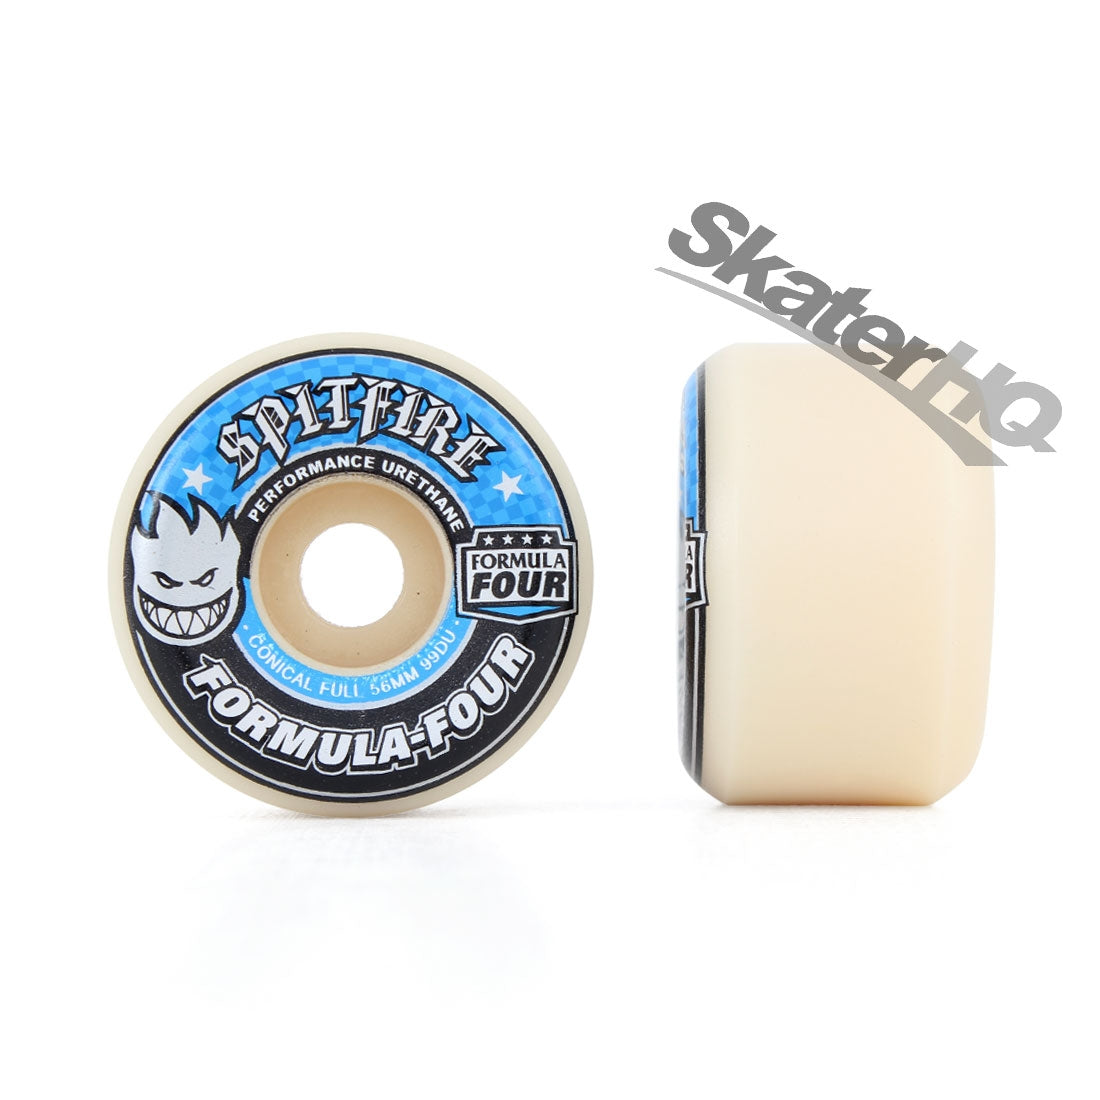 Spitfire Form Four 56mm 99A Conical Full - Blue Skateboard Wheels